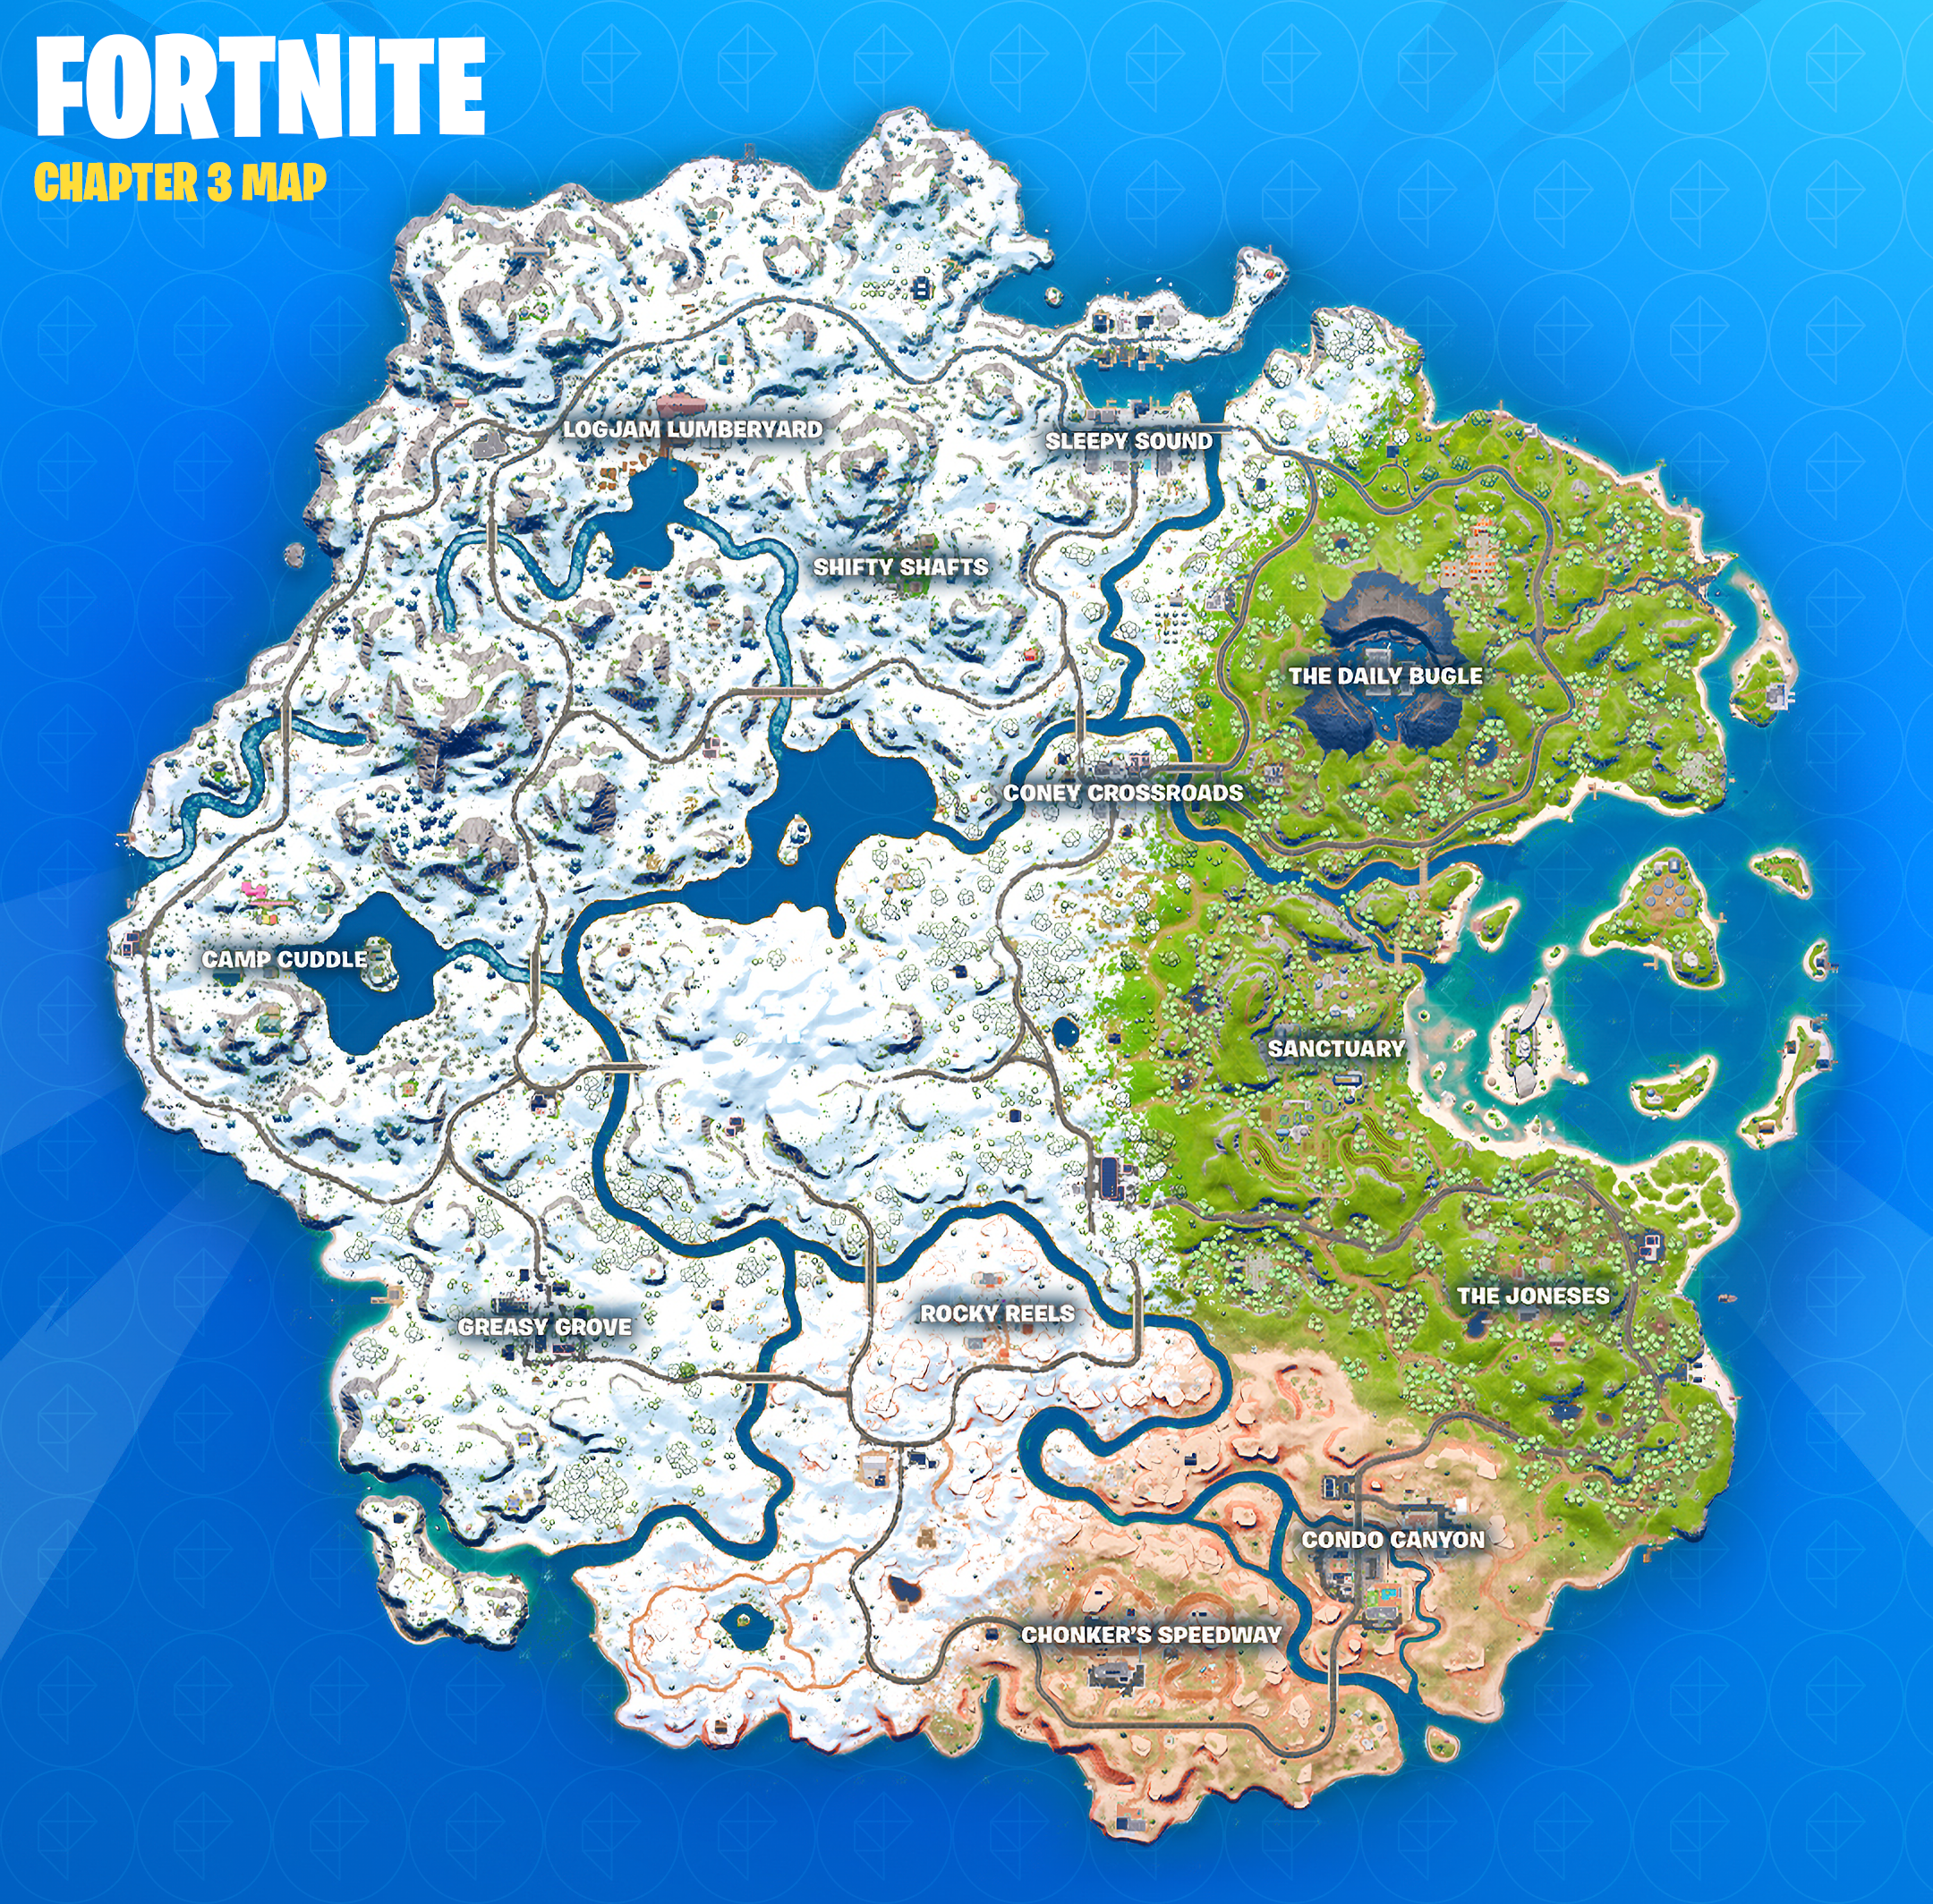 The map from Fortnite Chapter 3